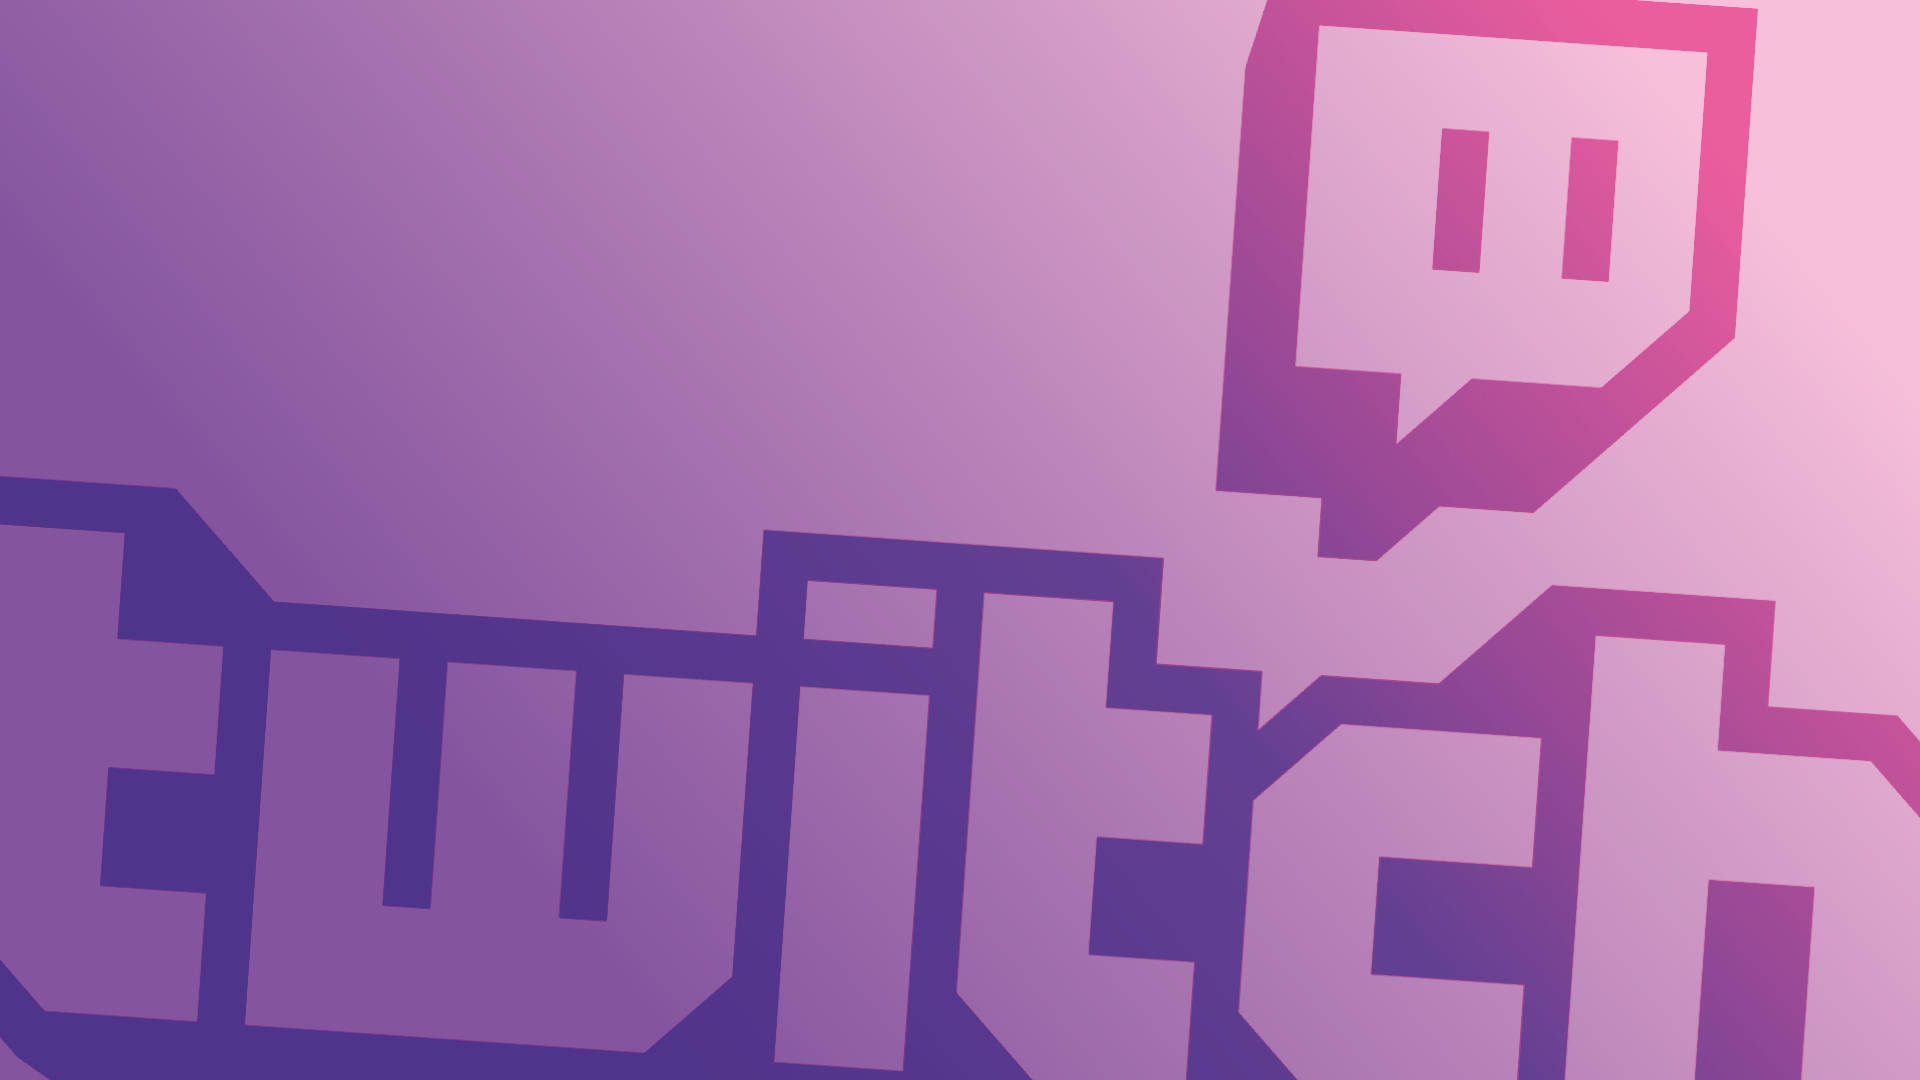 Twitch 1920X1080 Wallpaper and Background Image